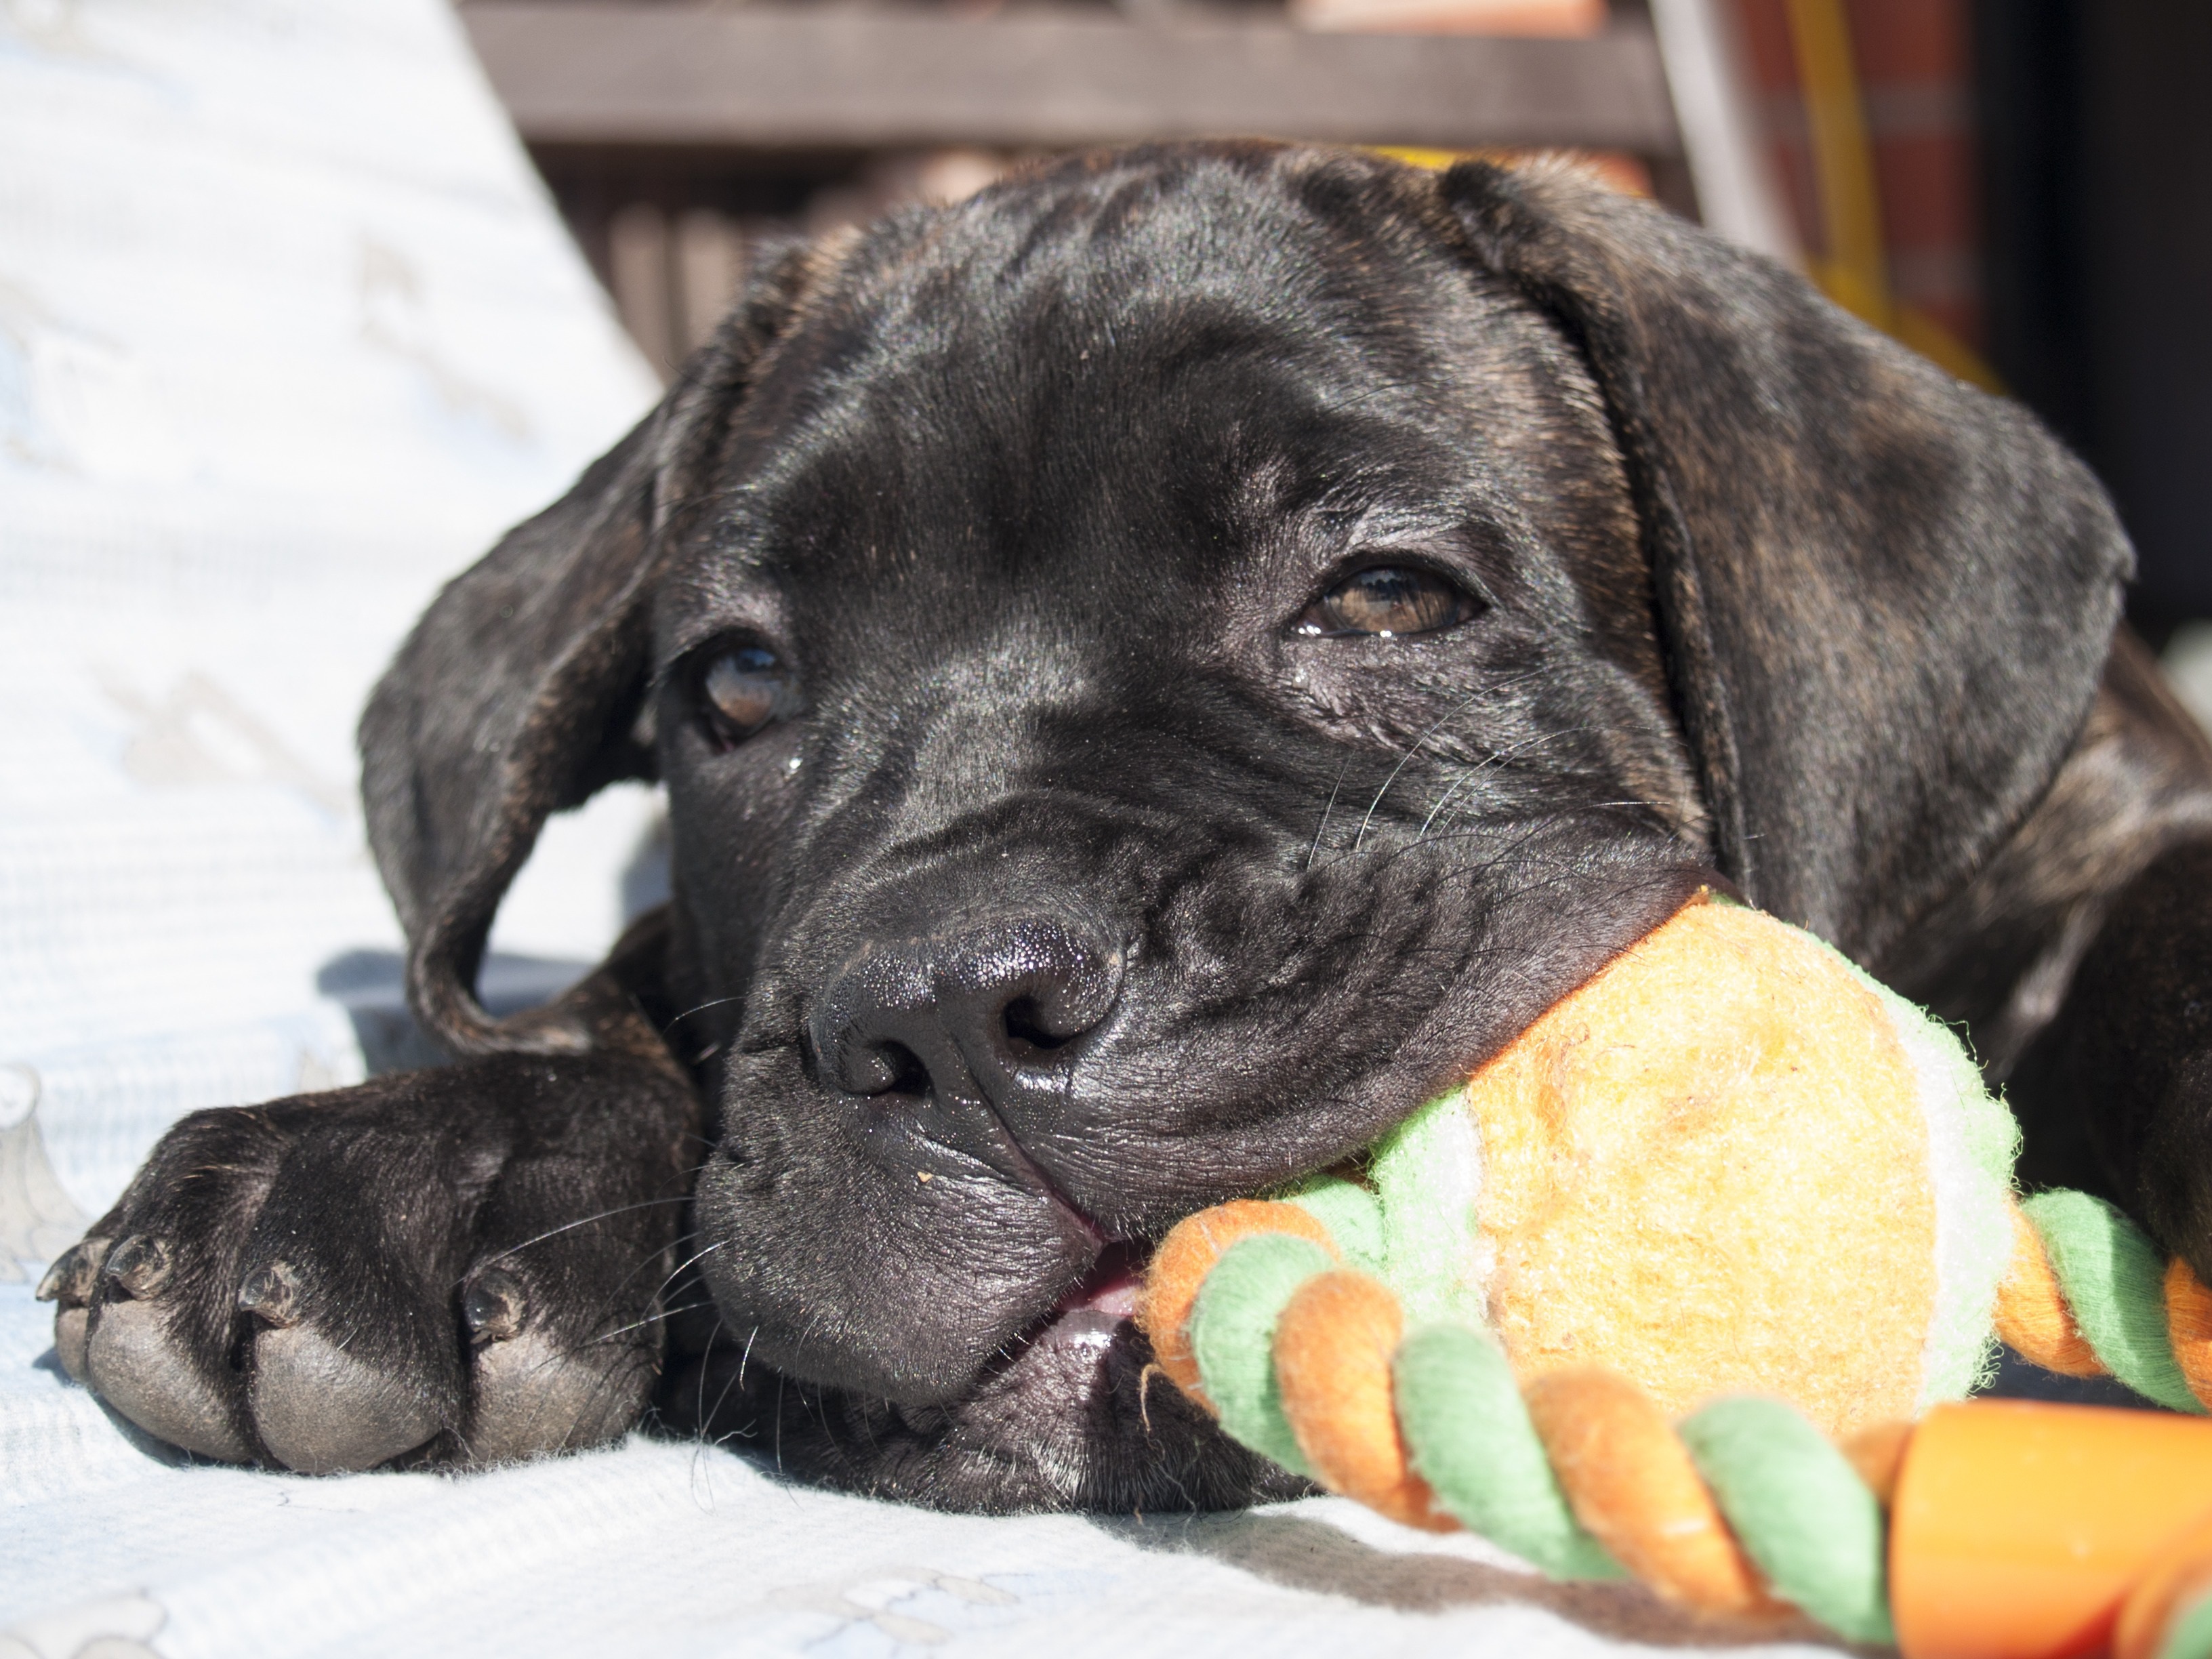 cane corso puppy with toy in mouth looking mischievous